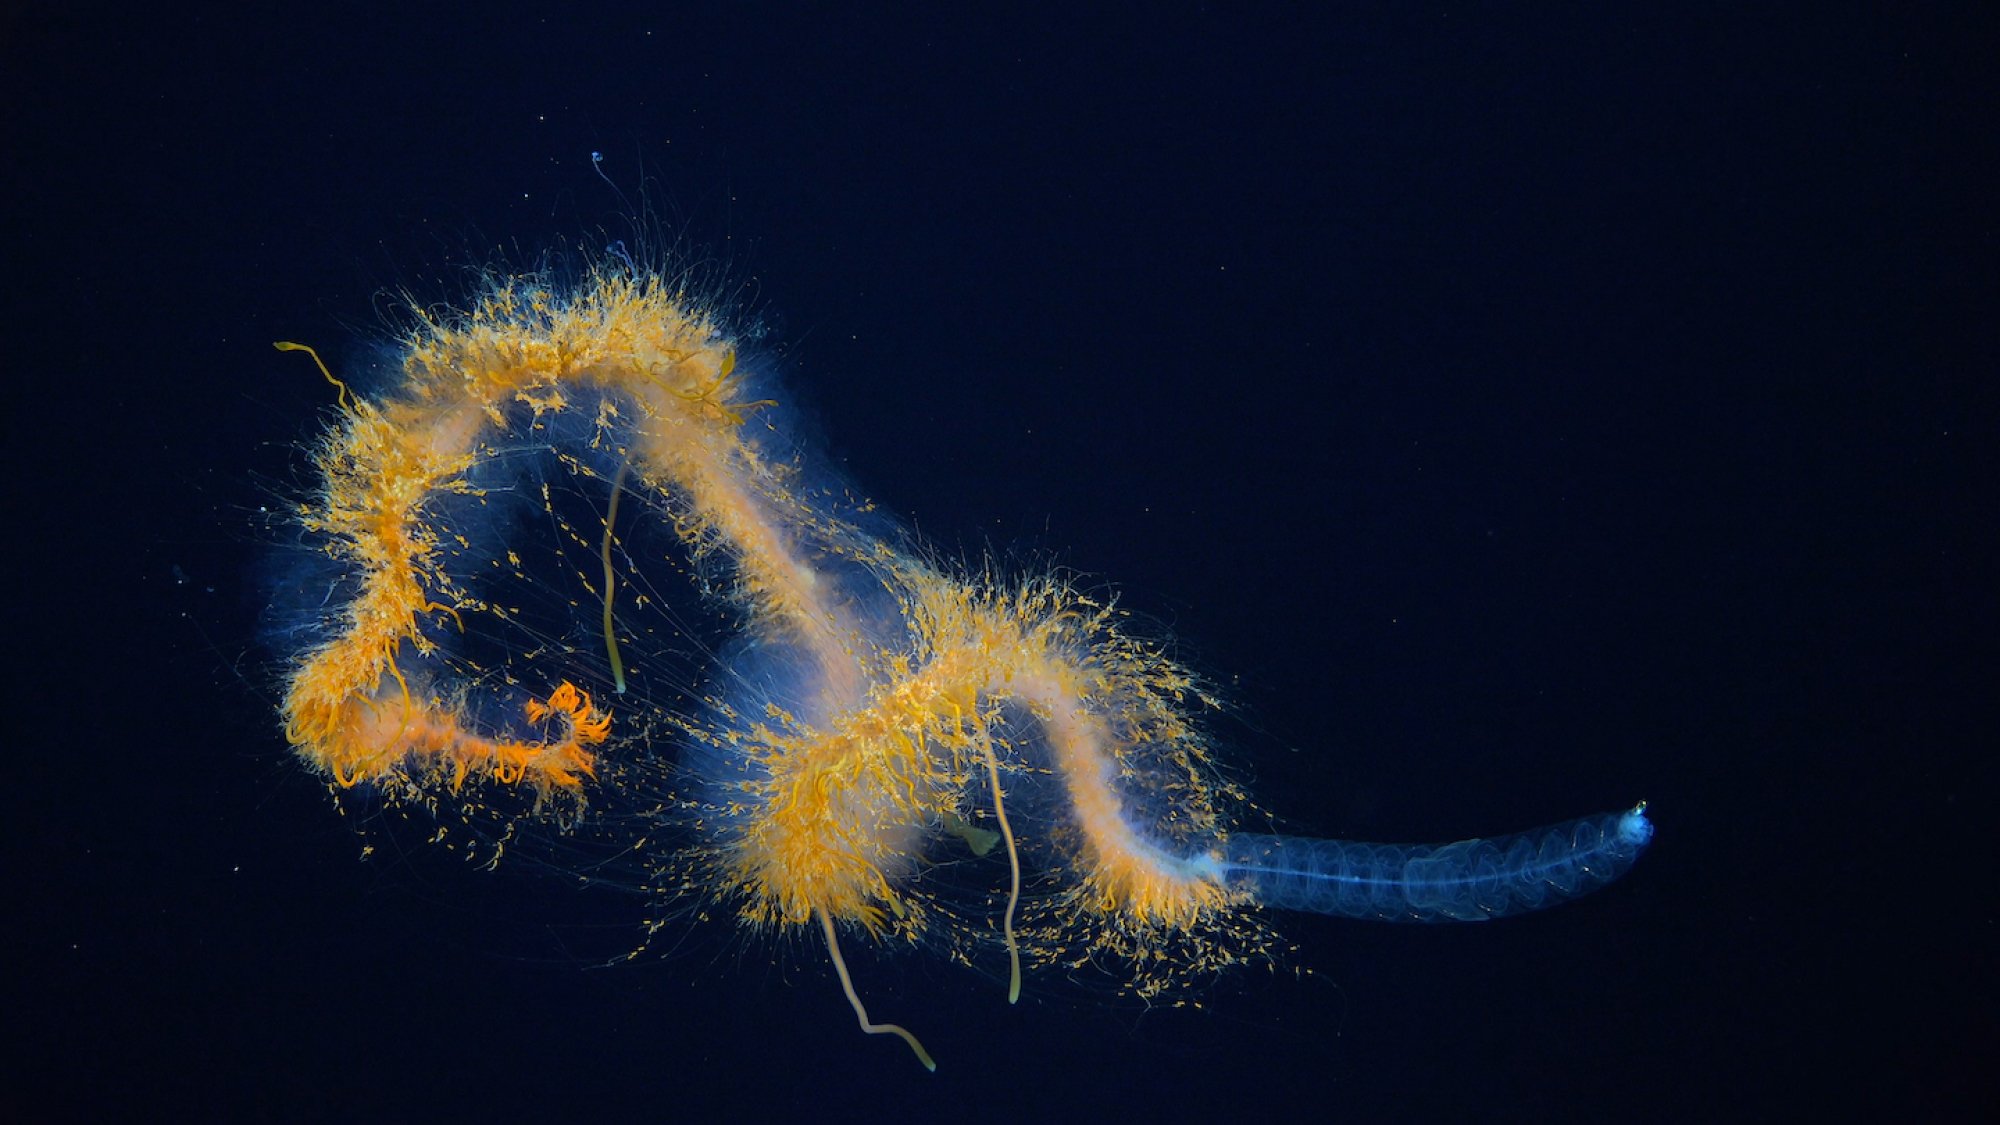 A long "galaxy siphonophore," which is actually a colony of many organisms, spotted on a dive between 800 and 1,200 meters (2,625 to 3,940 feet) down.